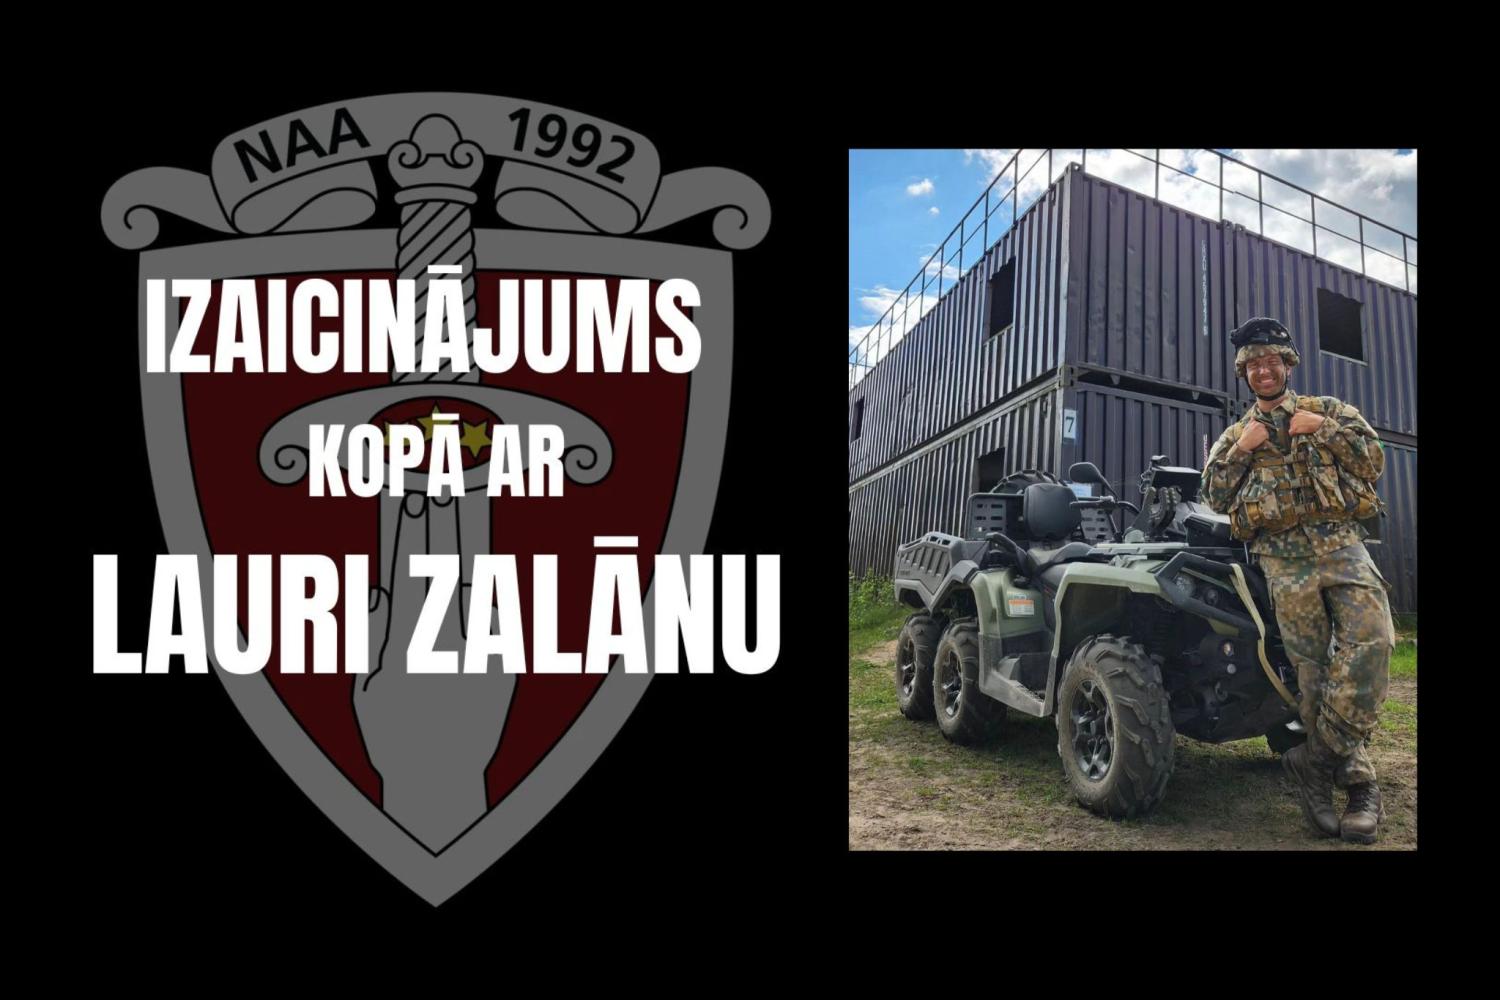 A day in the life of Lauris at the National Defense Academy of Latvia